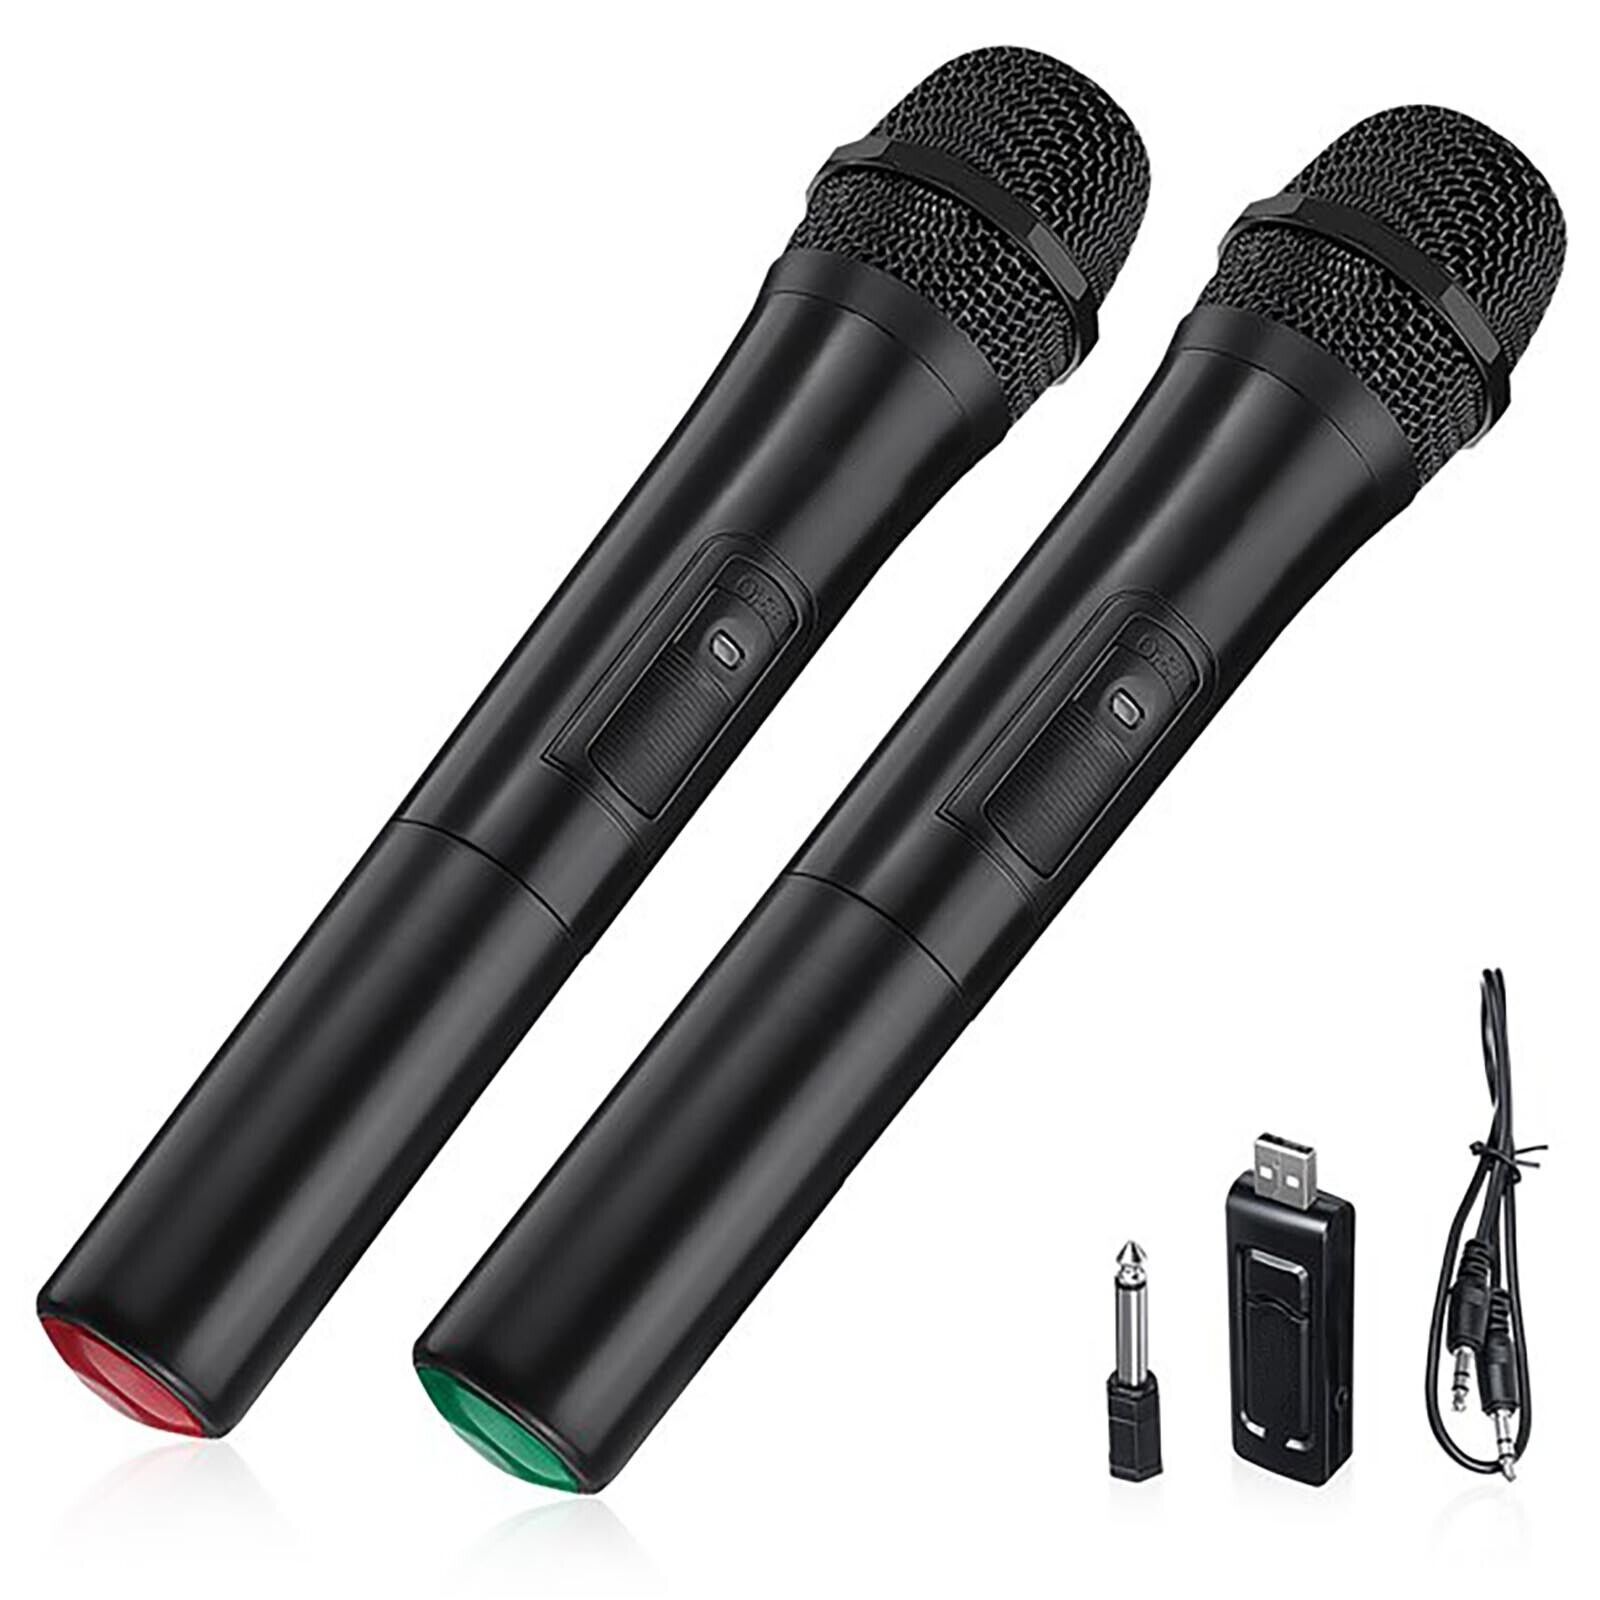 2 Pack Dual USB UHF Wireless Microphone System Kit With Receiver For Karaoke